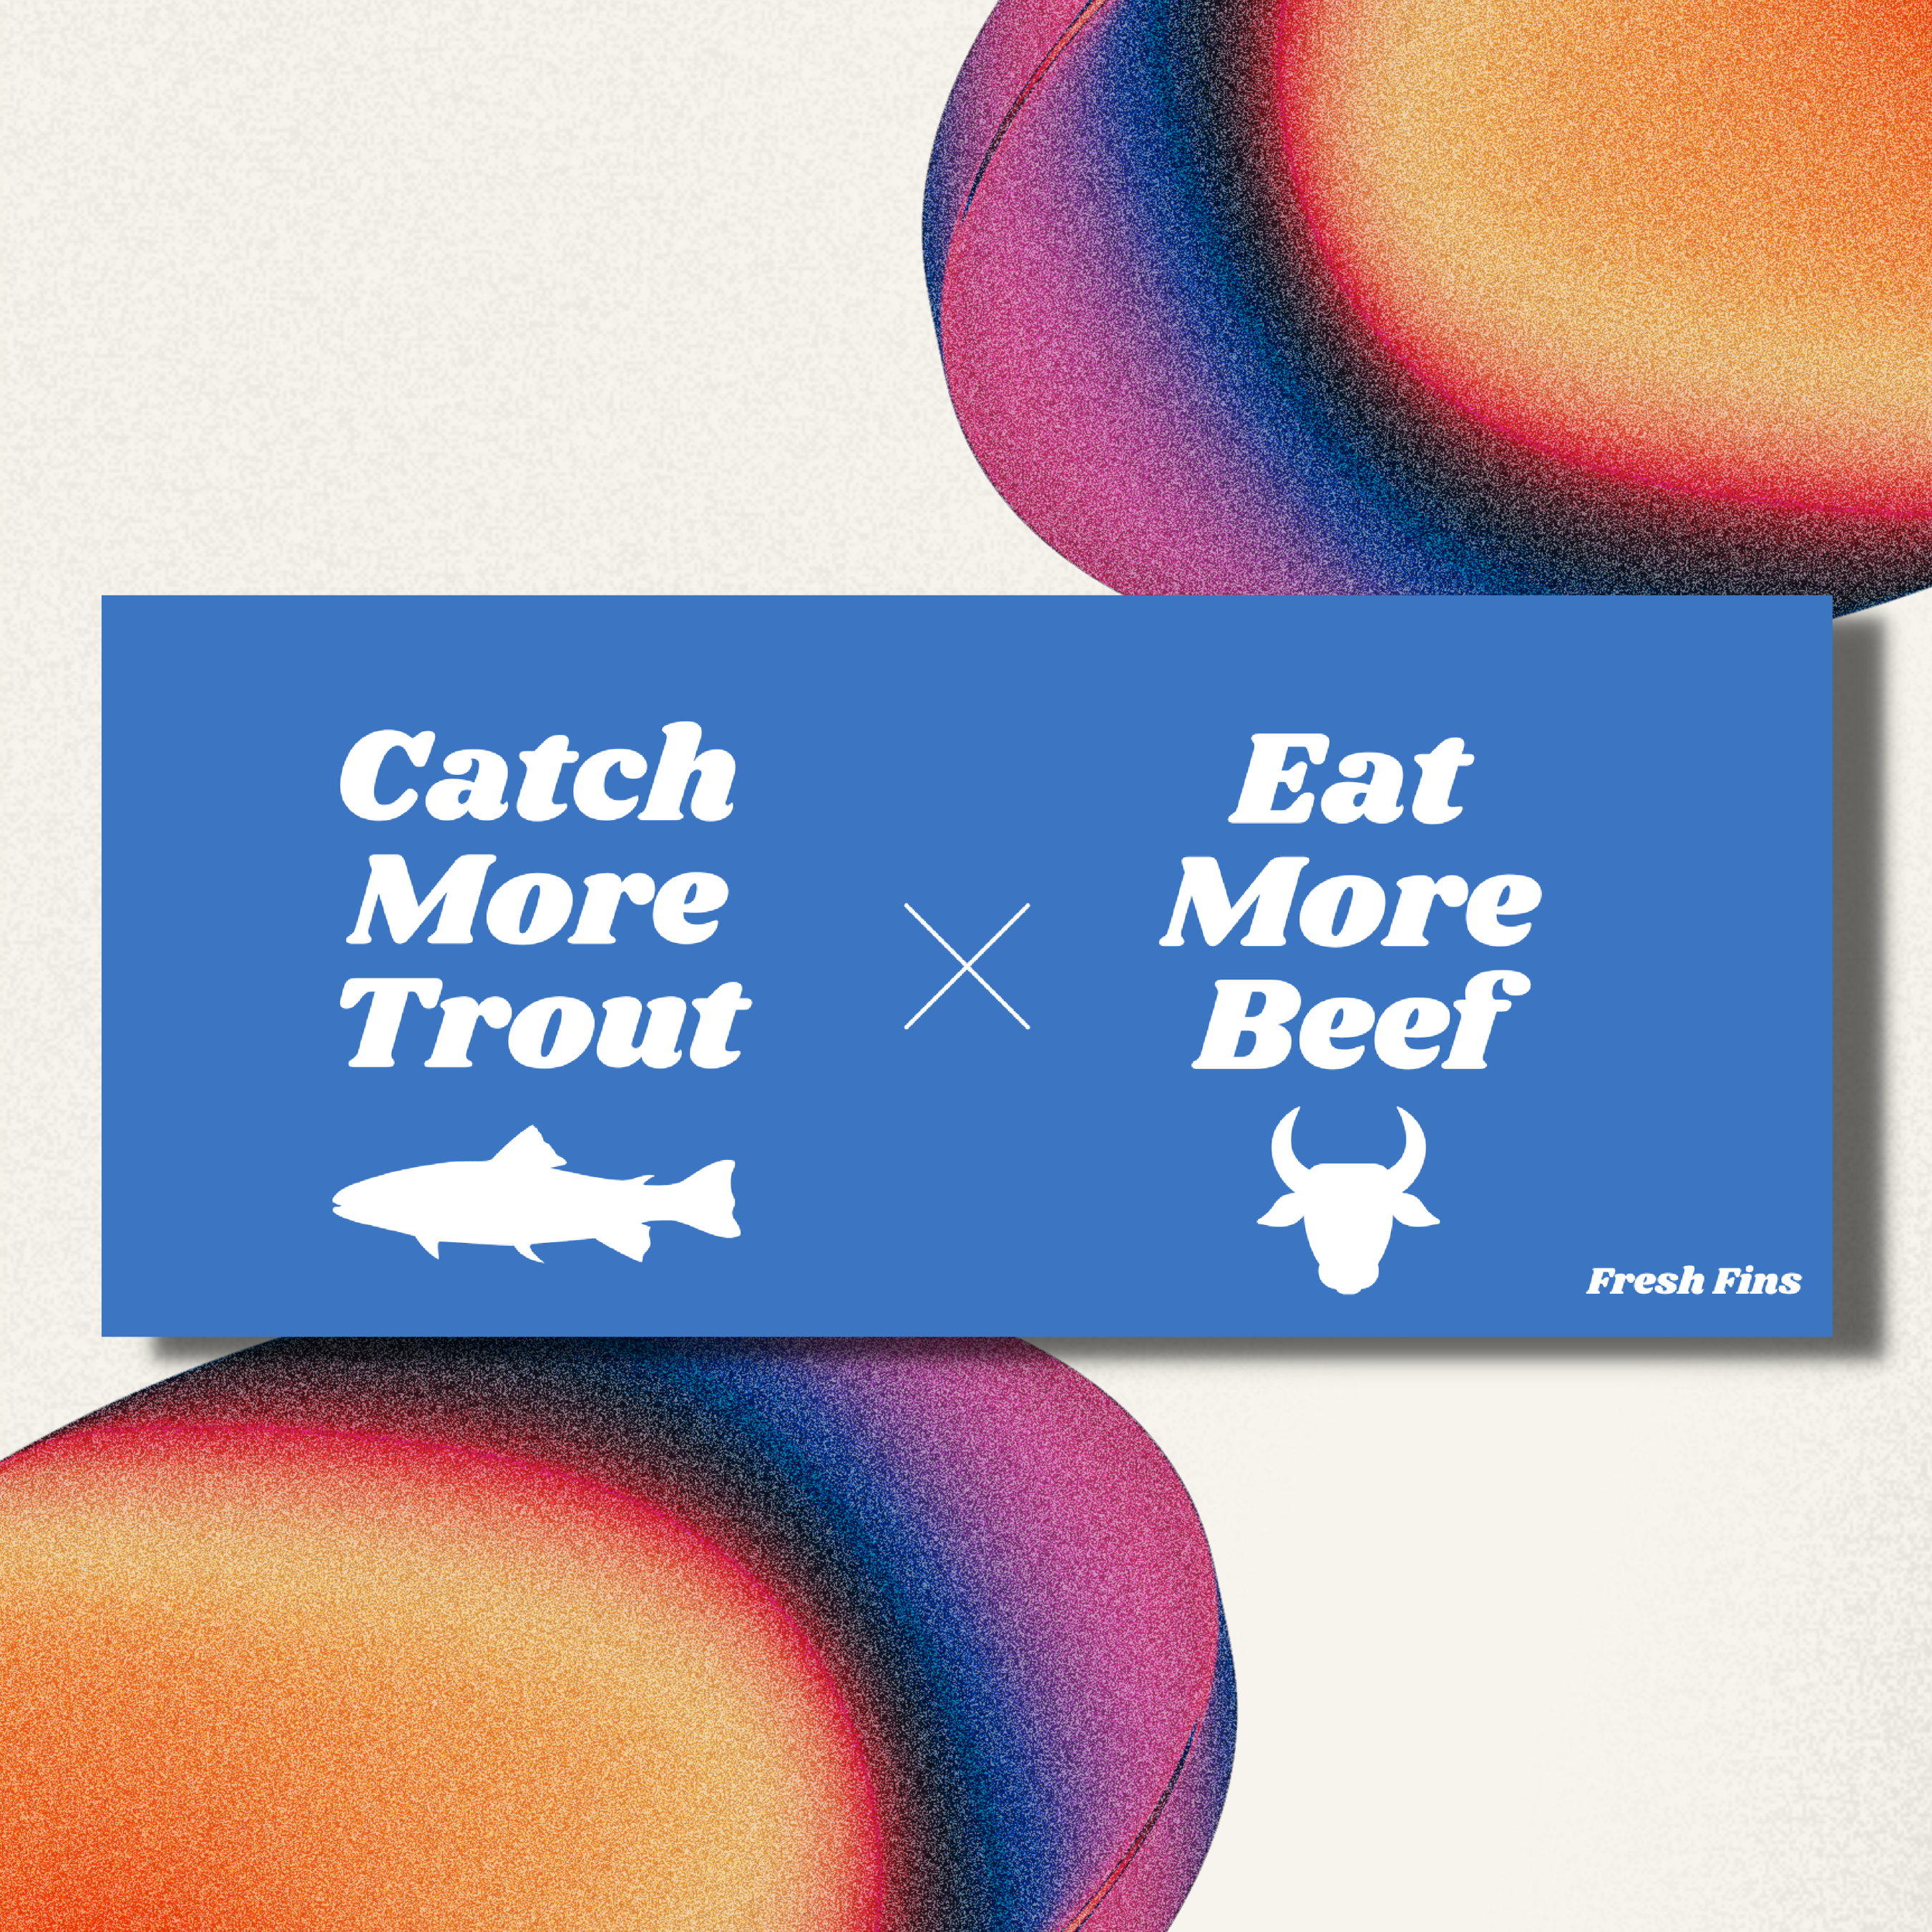 Catch More Trout, Eat More Beef